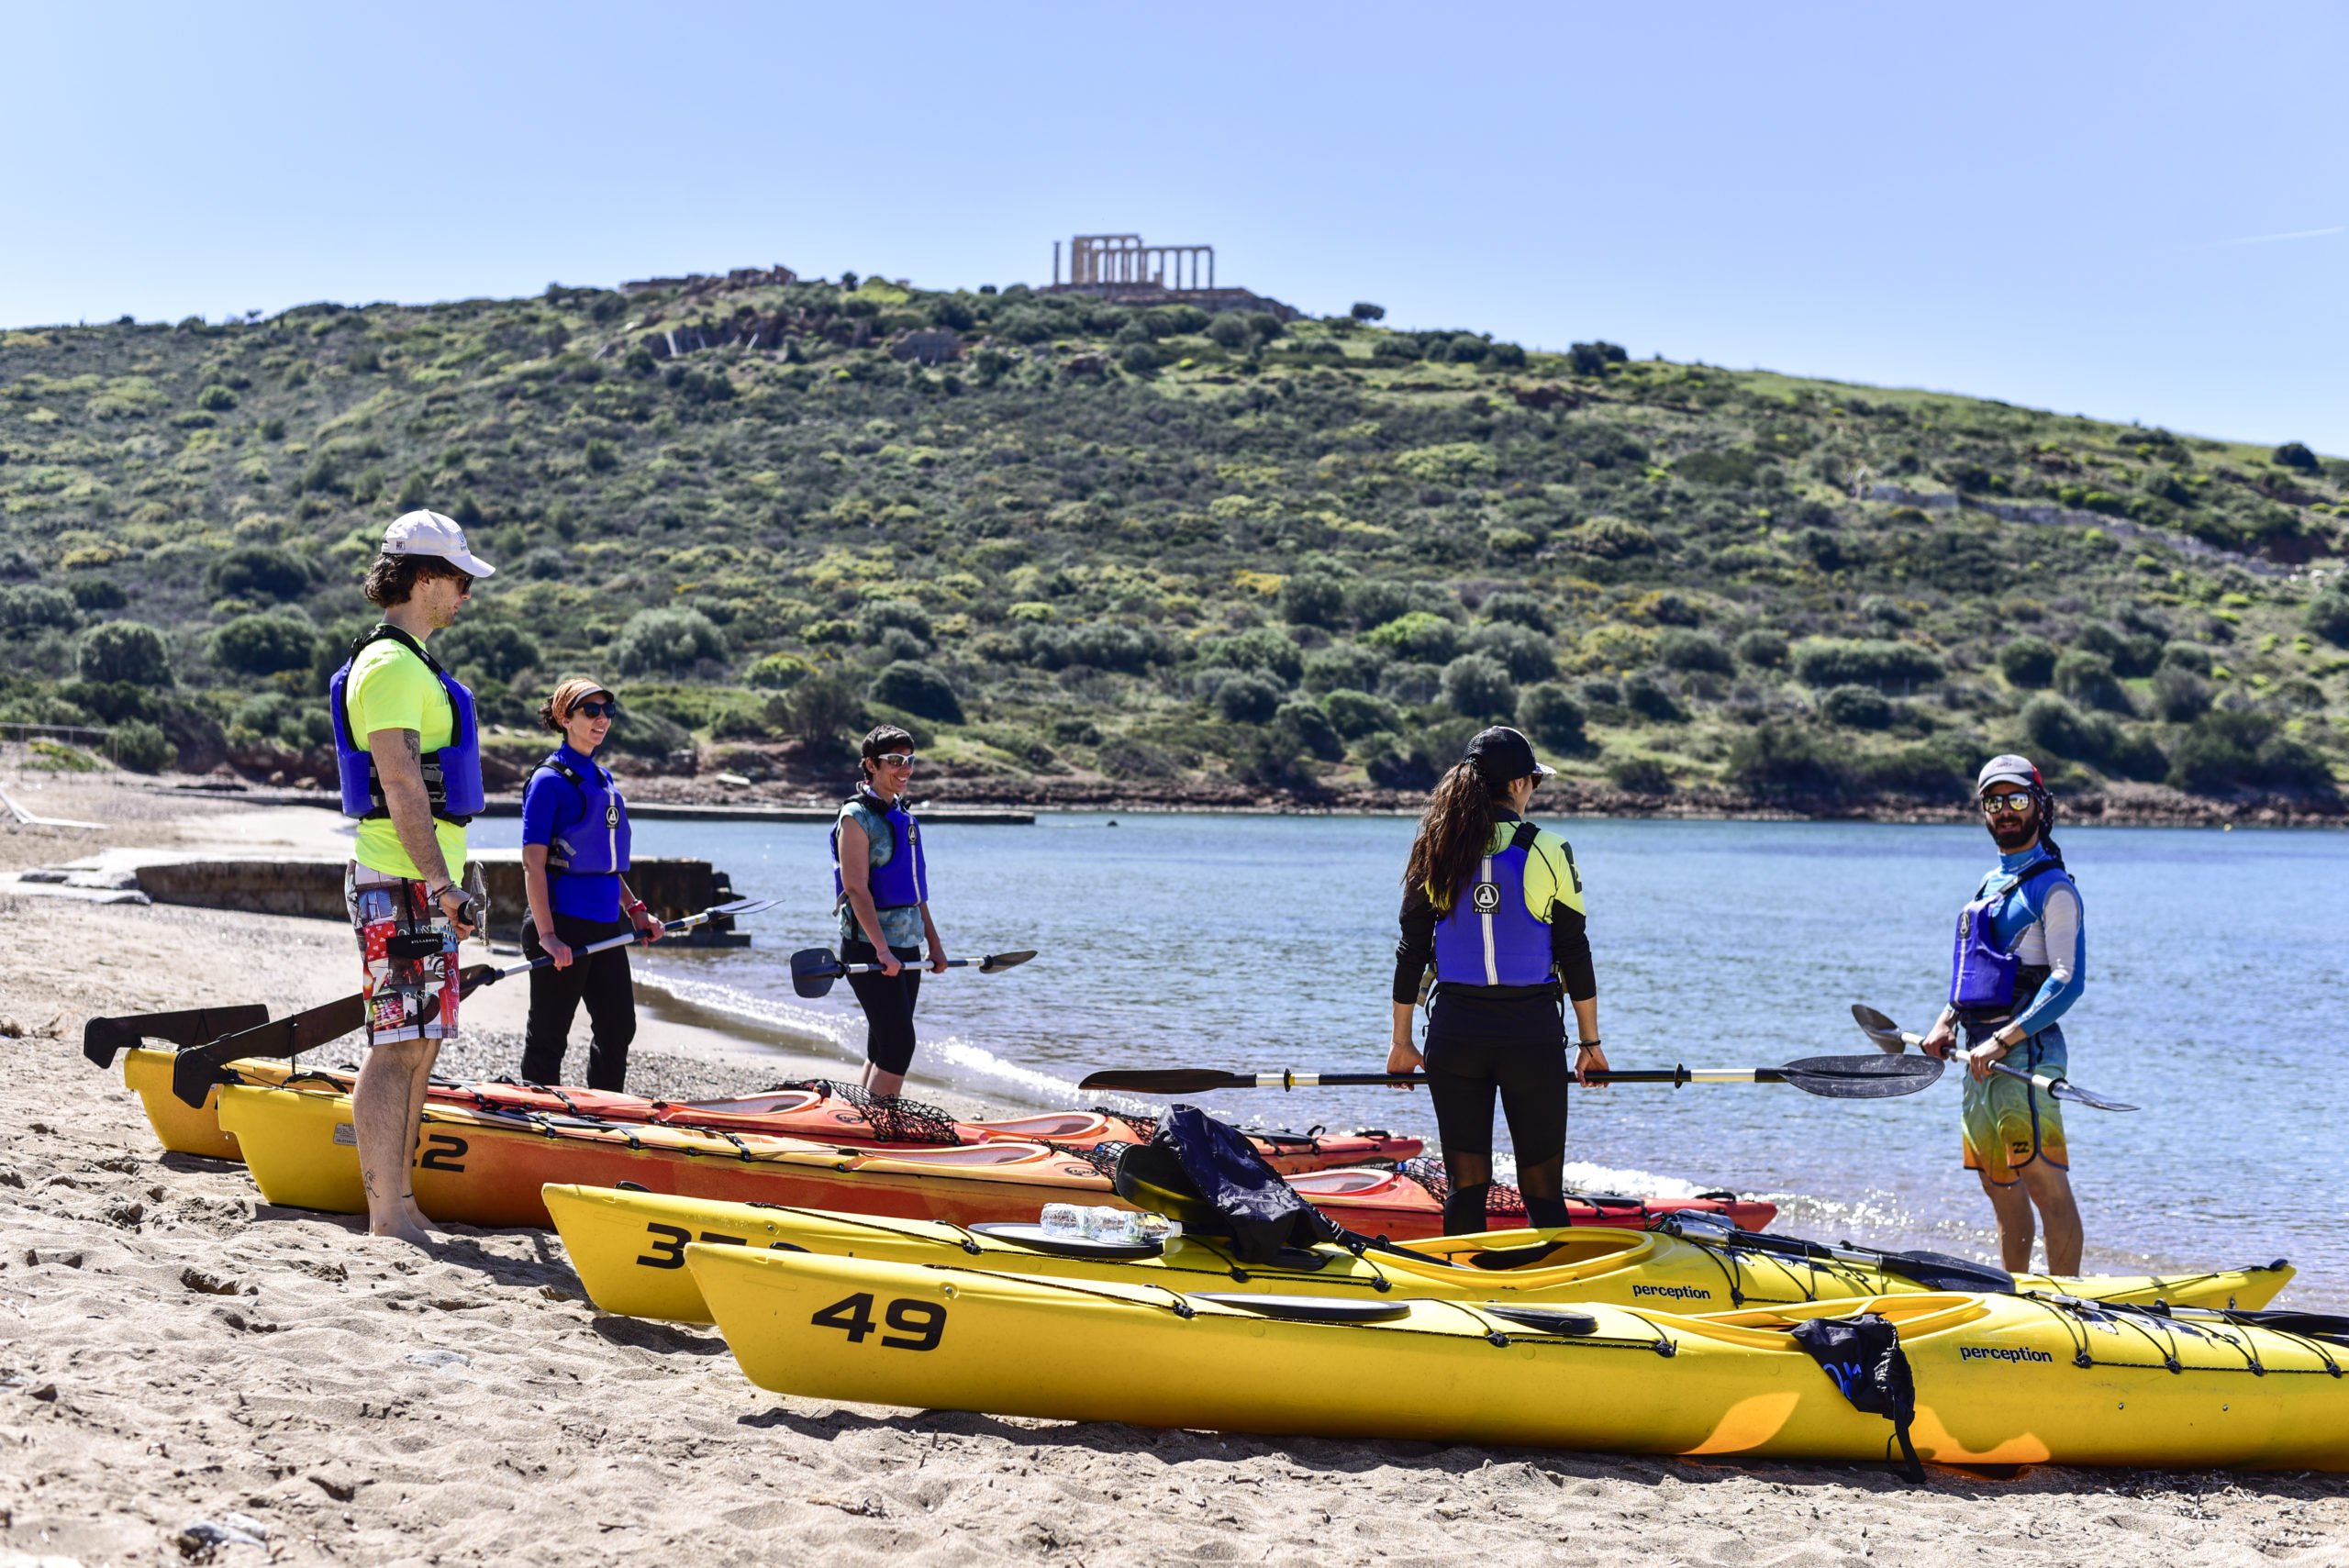 A Professional Instructor Will Introduce You To The Equipment On The Sea Kayak Tour From Athens_70